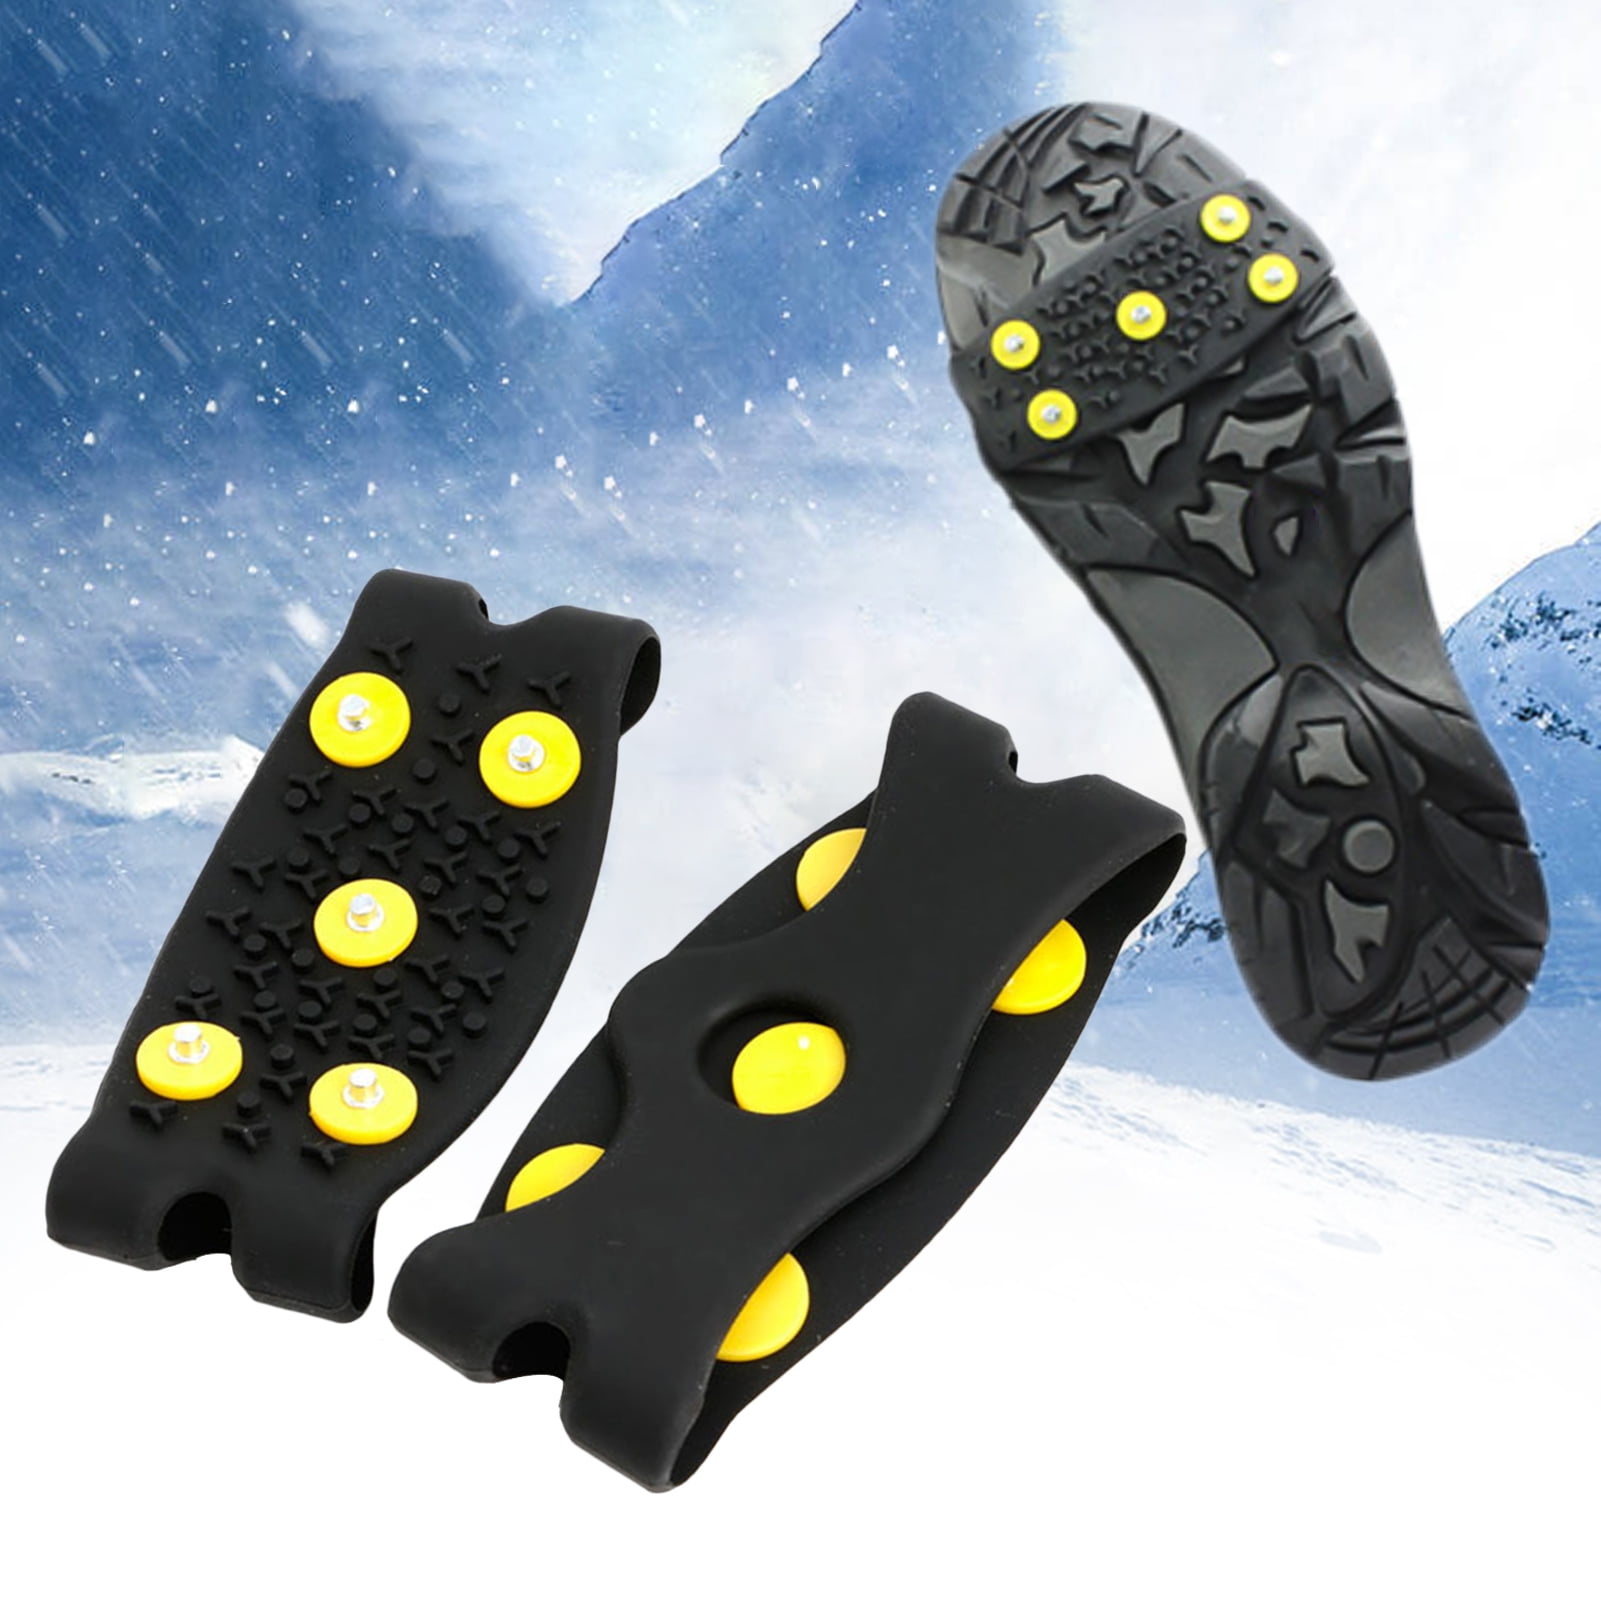 5 Studs Snow Ice Climbing Anti Slip Spikes Grips Crampons Cleat Shoes Cover 